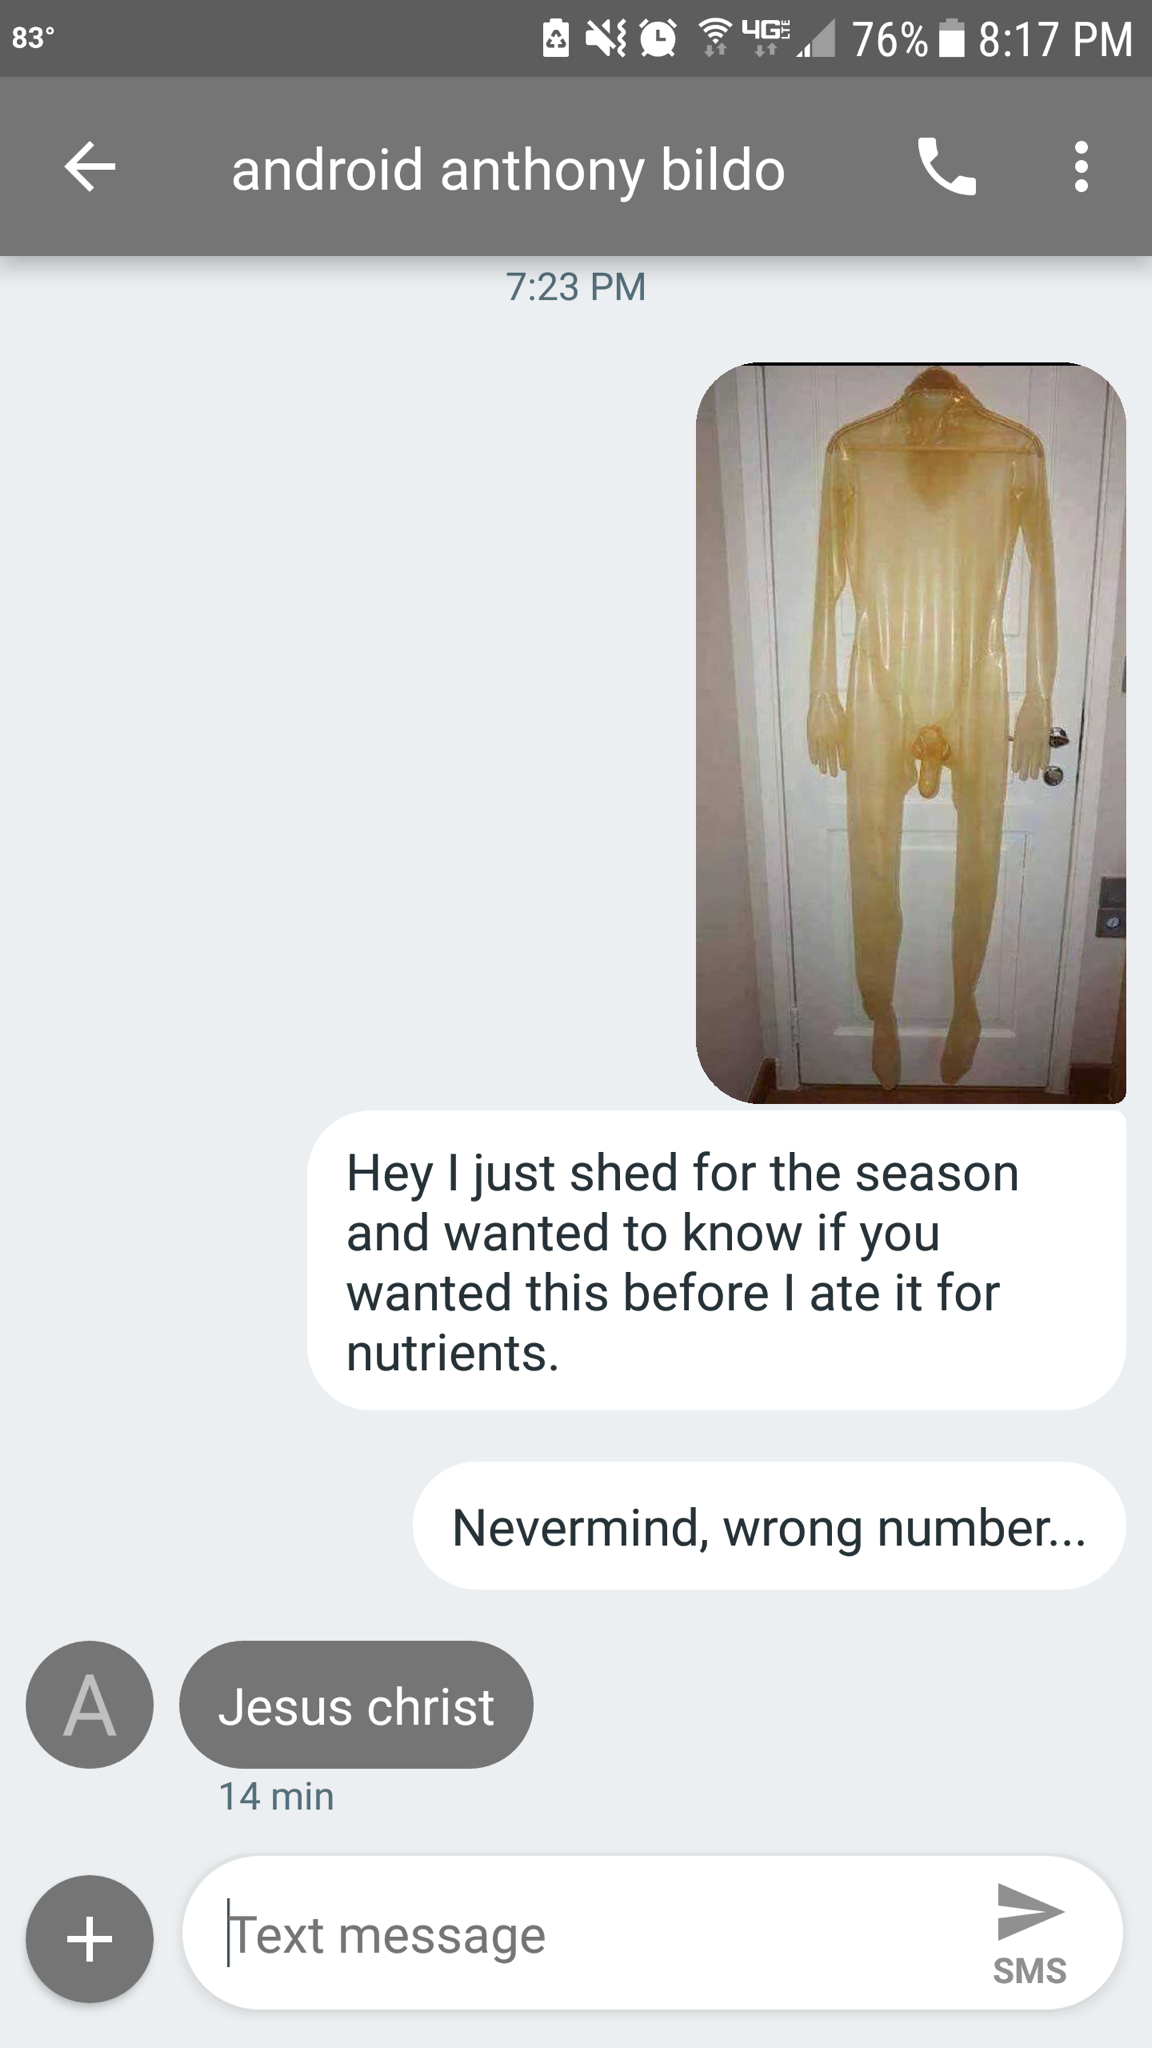 hey i just shed for the season - 2 No 4.76% android anthony bildo Hey I just shed for the season and wanted to know if you wanted this before I ate it for nutrients. Nevermind, wrong number... Jesus christ 14 min Text message